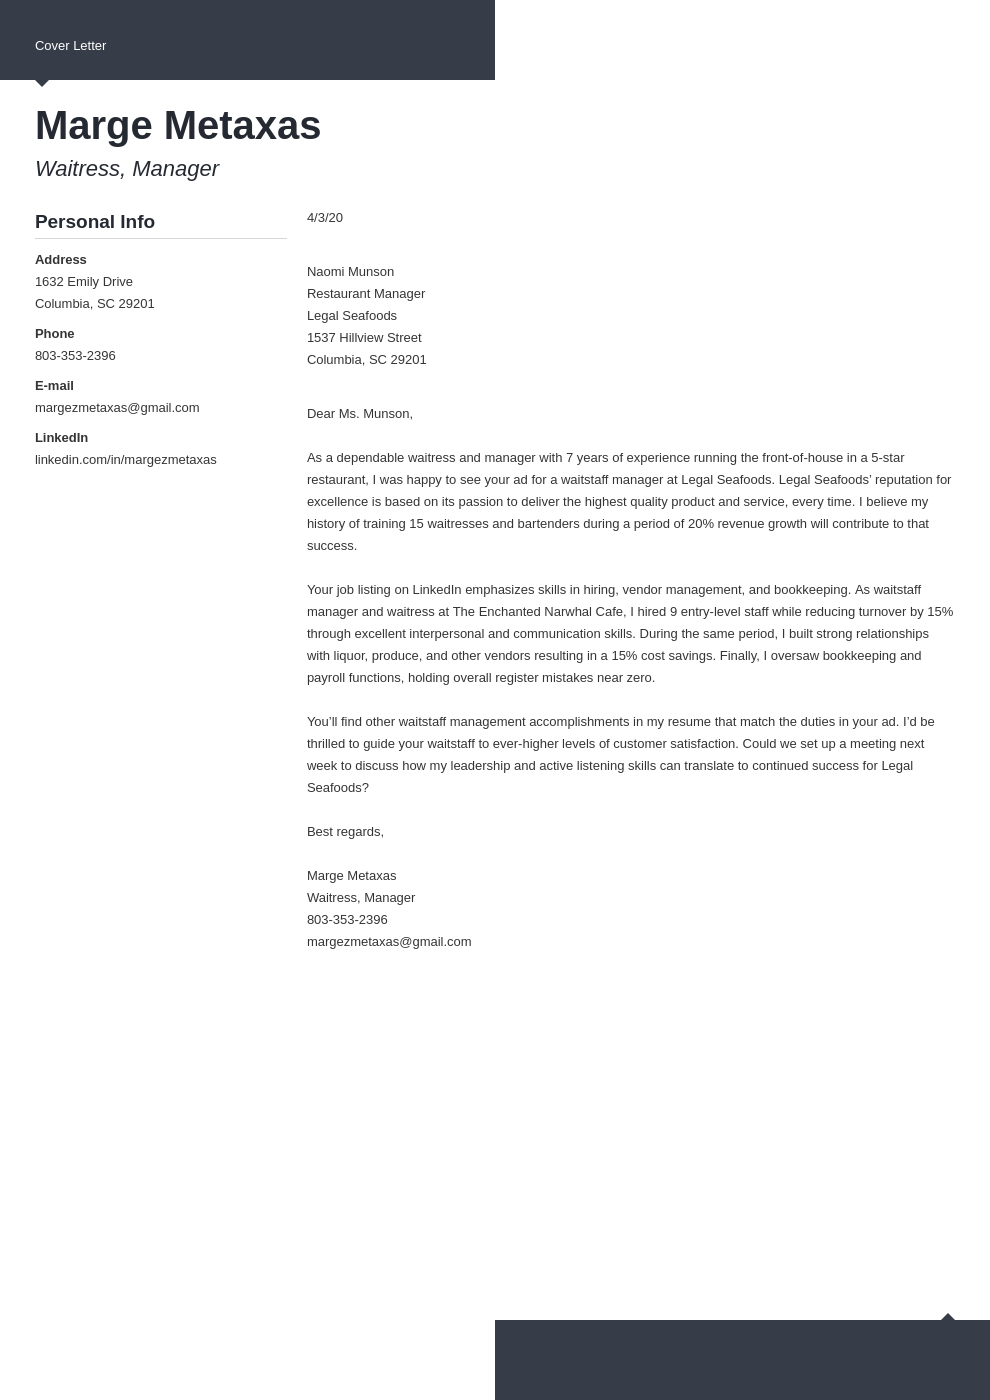 Cover letter examples - pastorwork